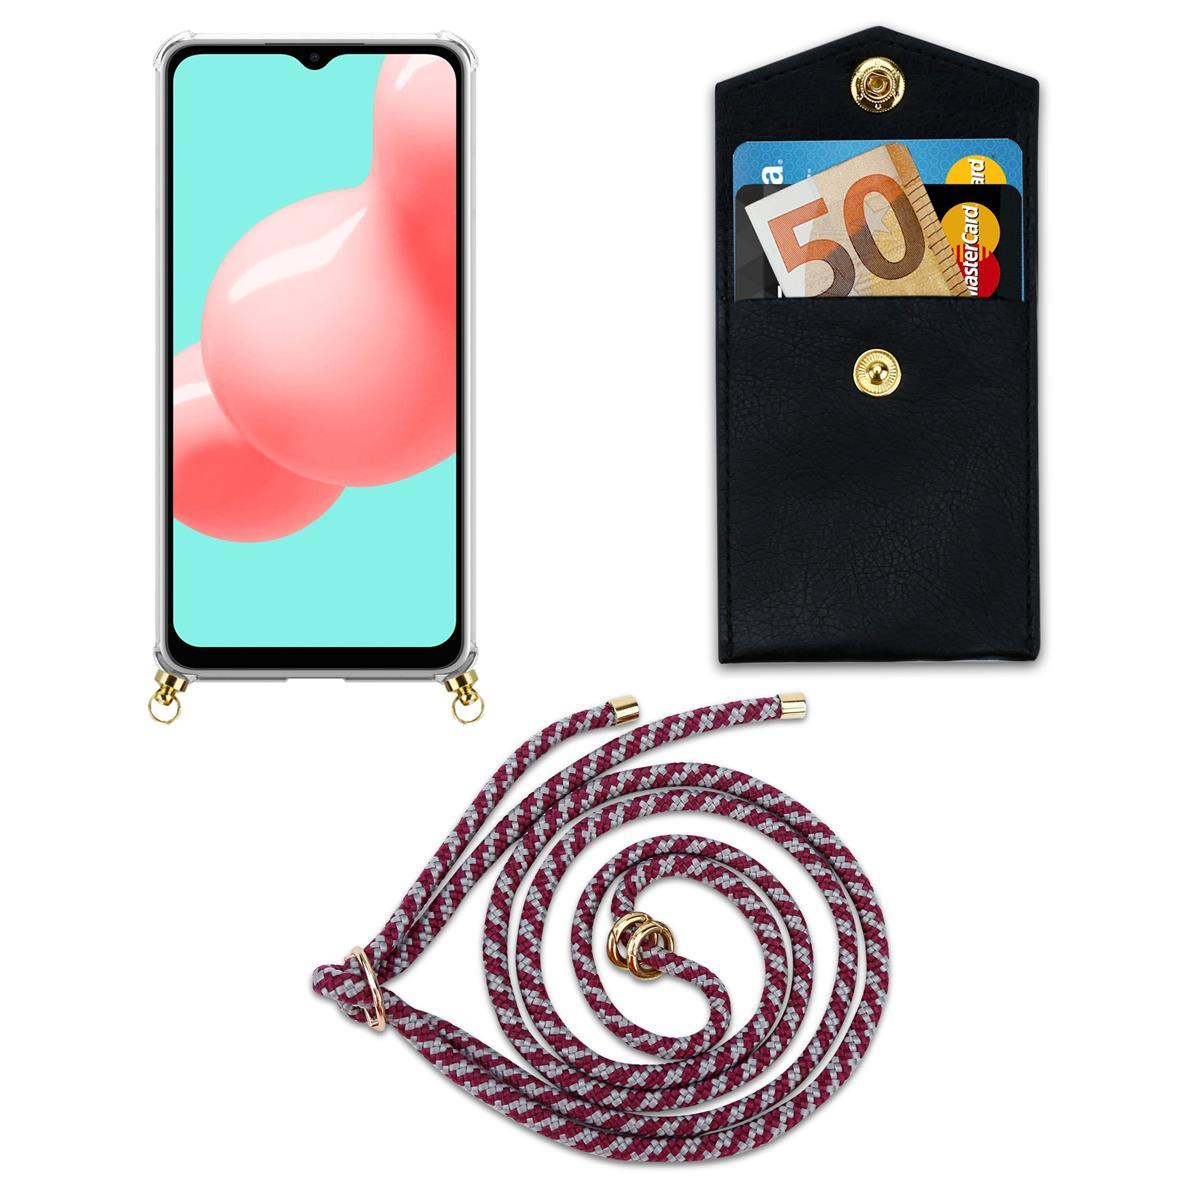 CADORABO Handy Kette mit Kordel Hülle, Band Ringen, und A32 Gold WEIß ROT Samsung, Backcover, 4G, Galaxy abnehmbarer